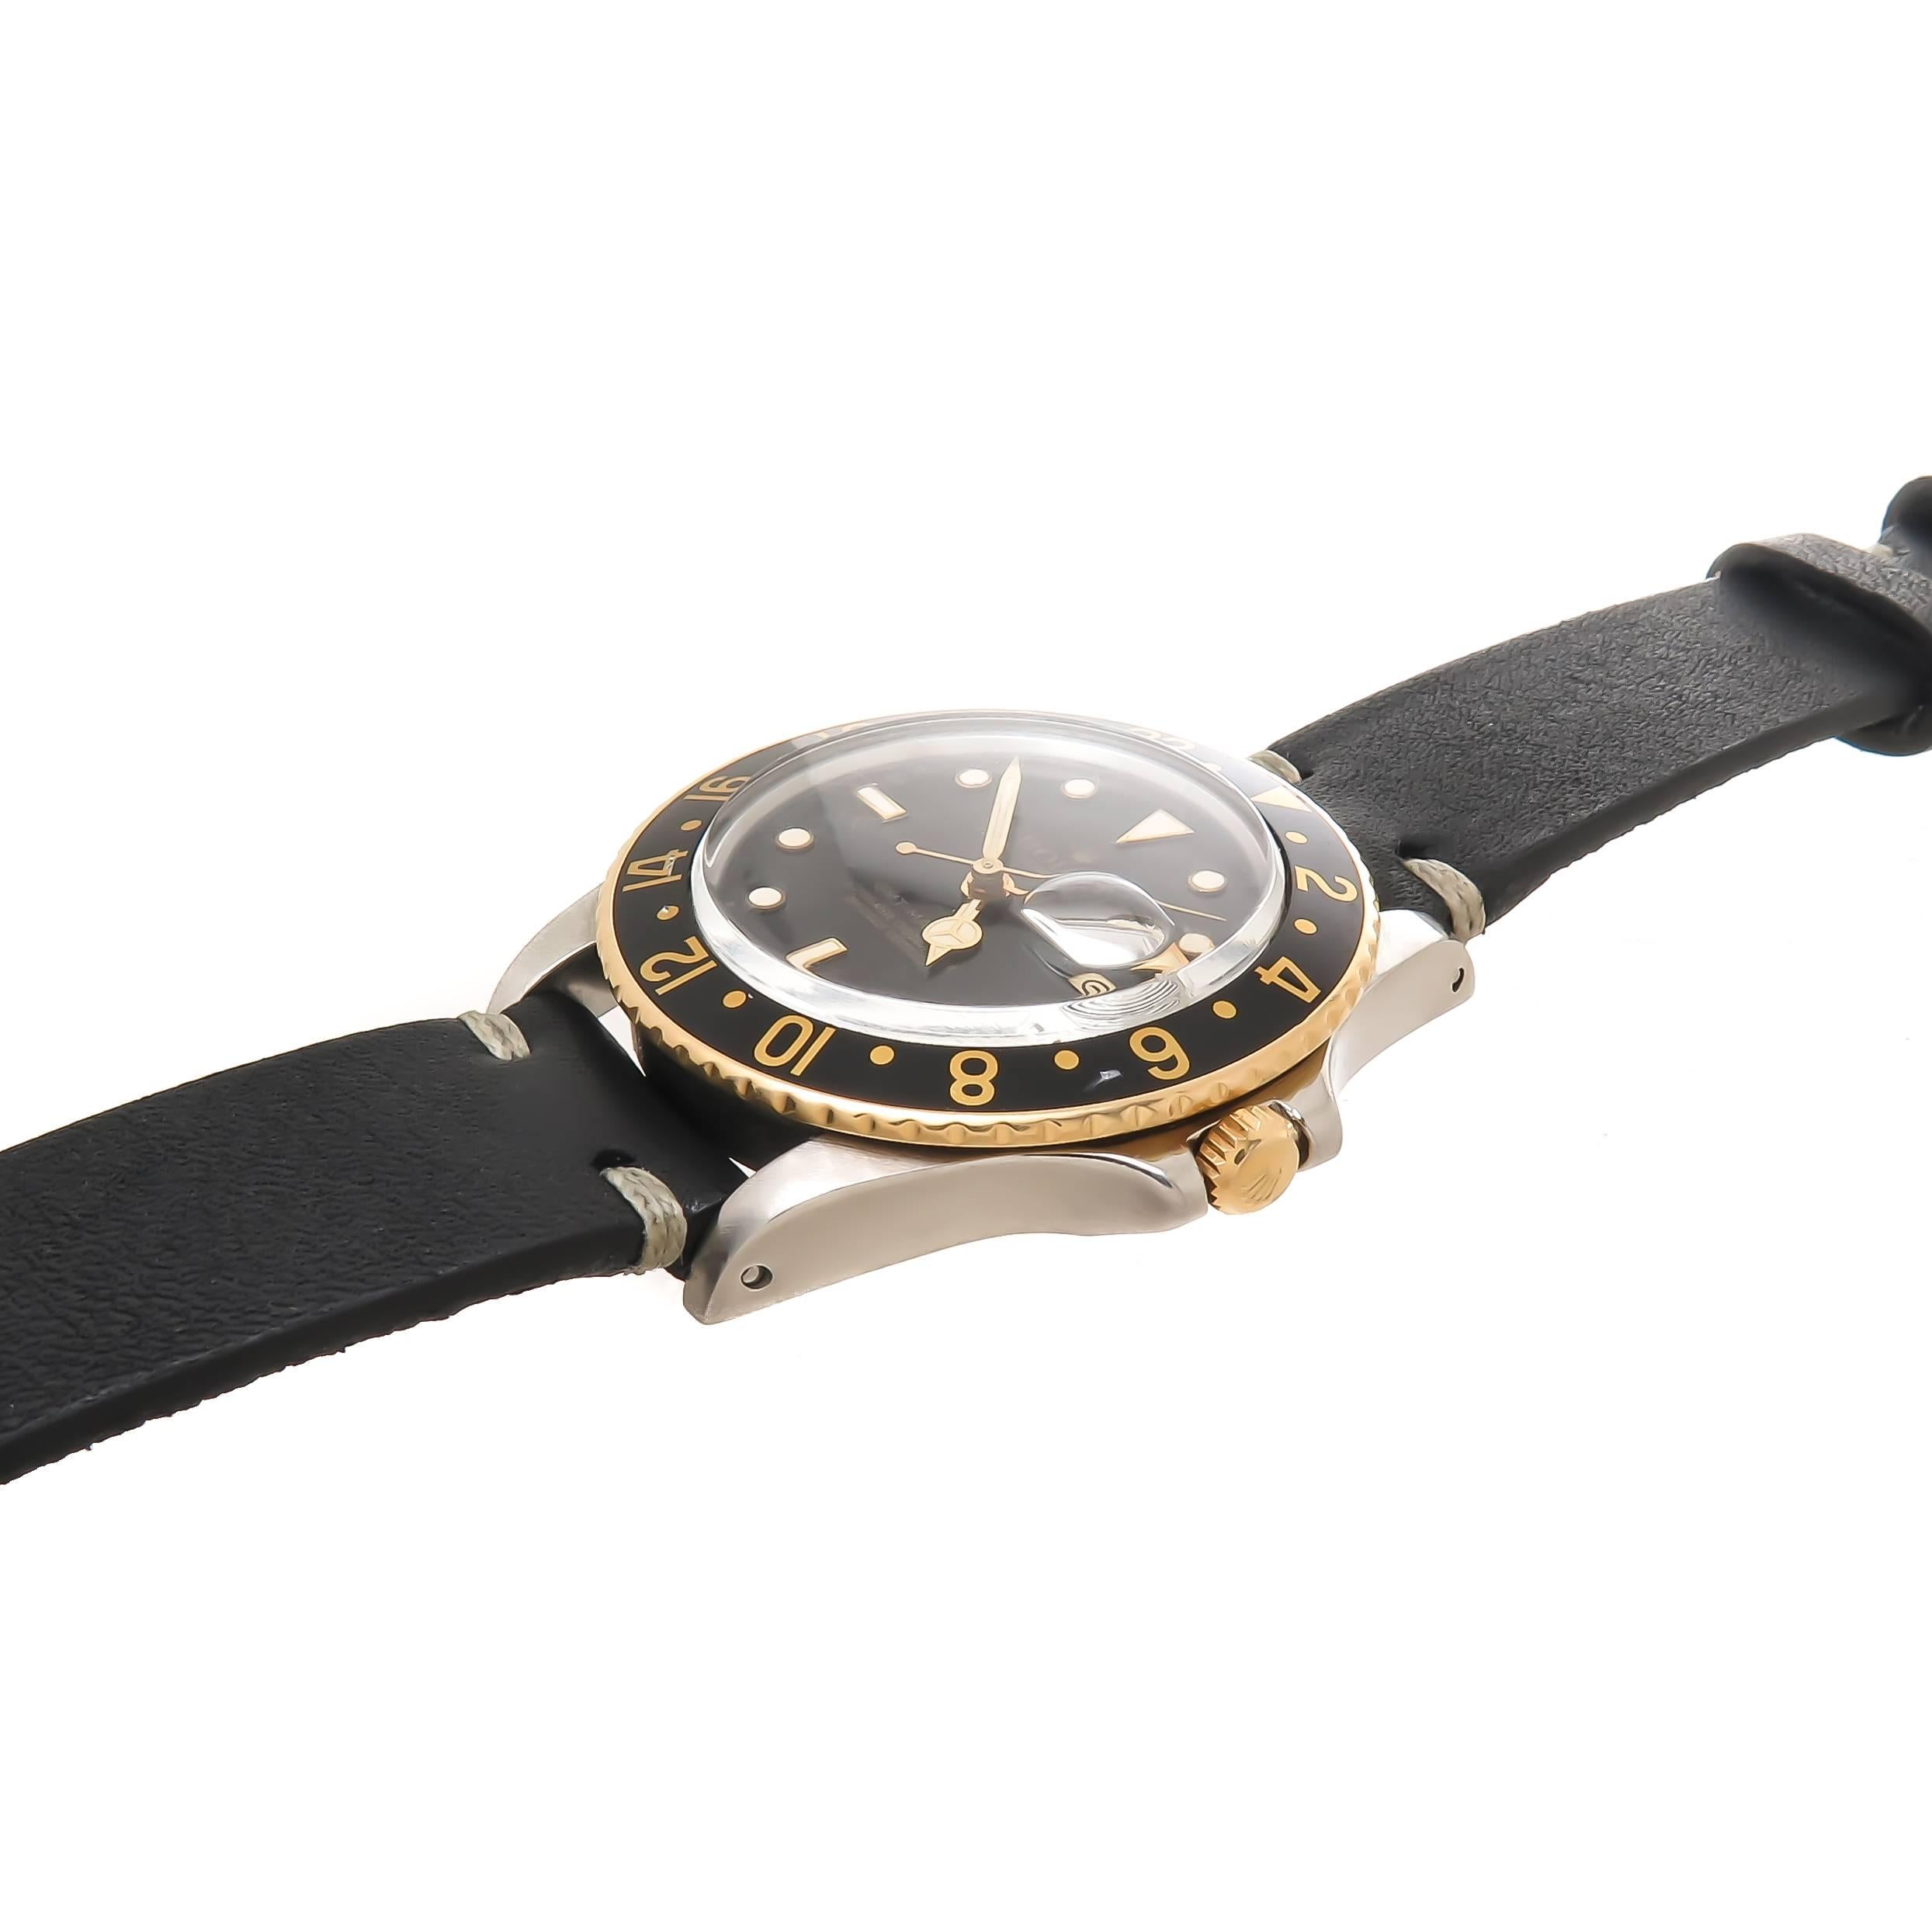 Circa 1985 Rolex GMT Master,  Reference 16753  Wrist Watch, 38 MM Stainless Steel case with Yellow Gold Rotating Bezel, Automatic, self winding Caliber 3075 movement,  Original, Mints condition Black Dial with Gold Gilt lettering, Gold Bezel markers